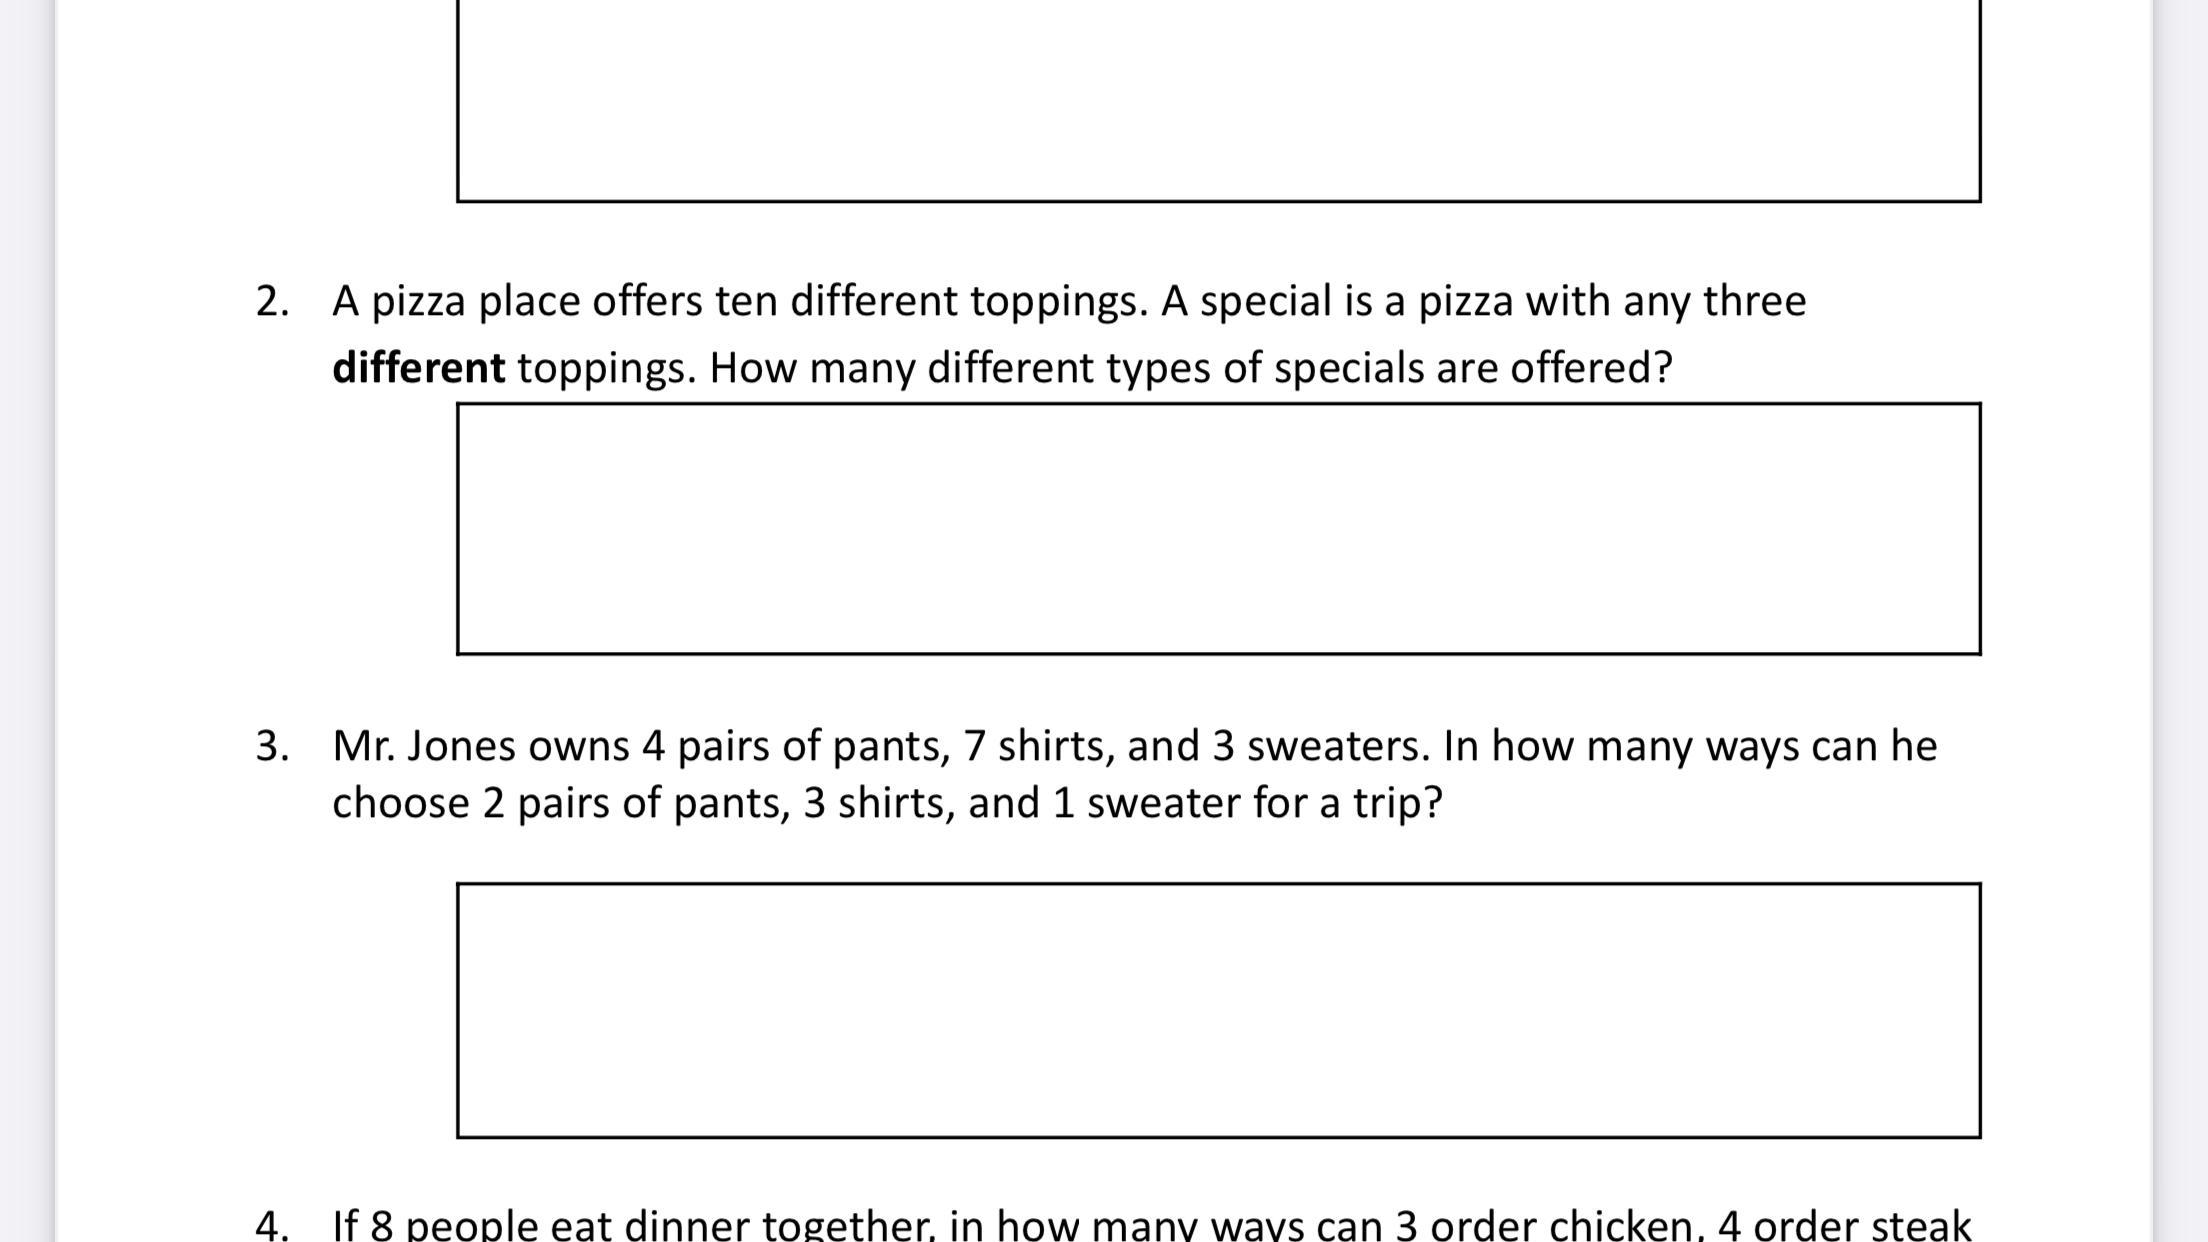 A Pizza Place Offers Ten Different Toppings. A Special Is A Pizza With Any Three Different Toppings.